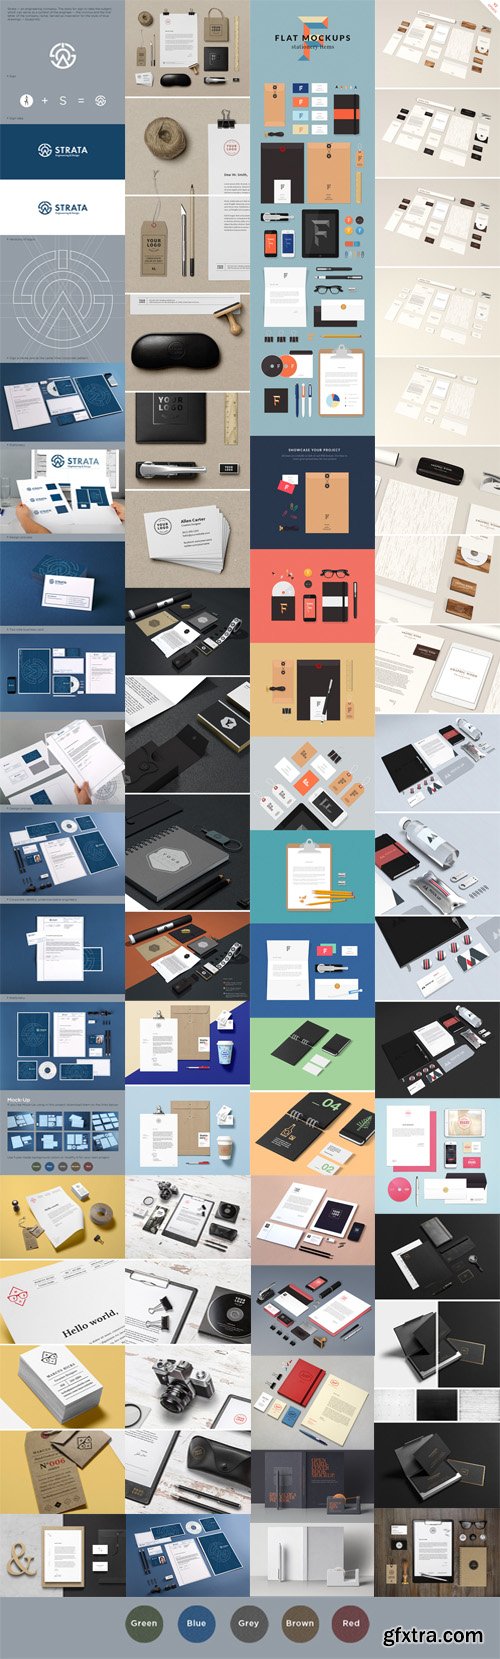 Corporate [Stationery/Branding/Identity] PSD Mockups Collection